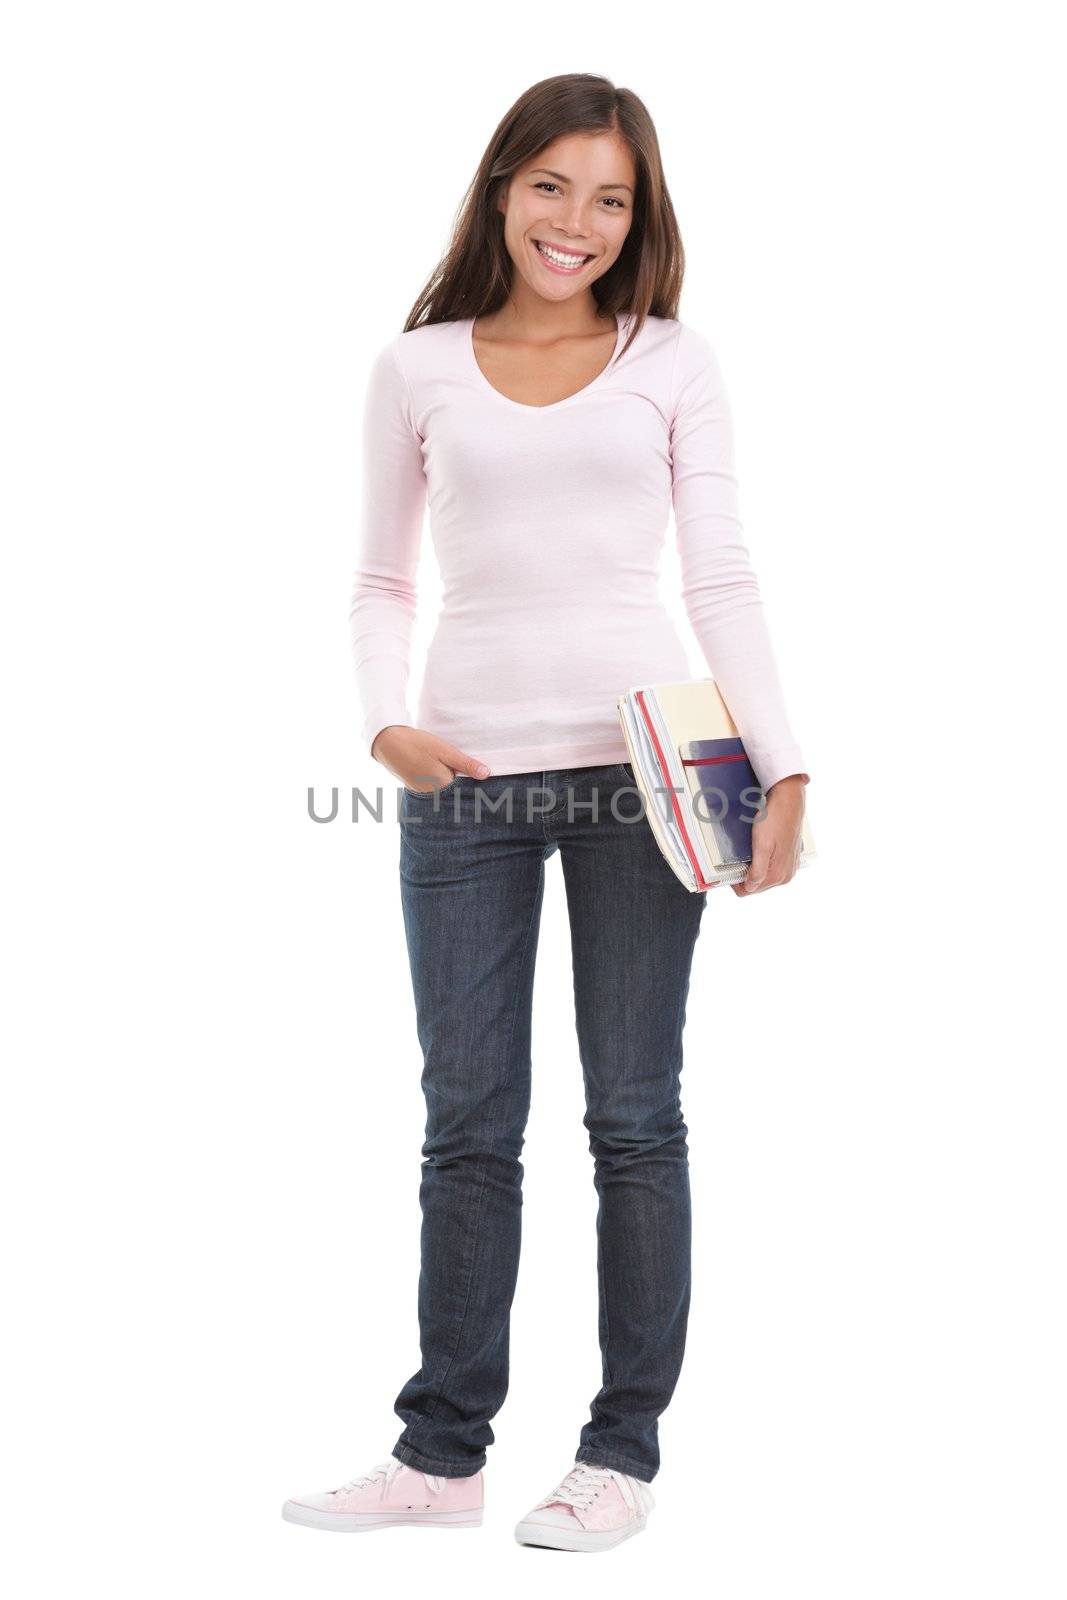 Woman university / college student. Full length image of female student holding books. Beautiful mixed race chinese / caucasian model. Isolated on seamless white background.